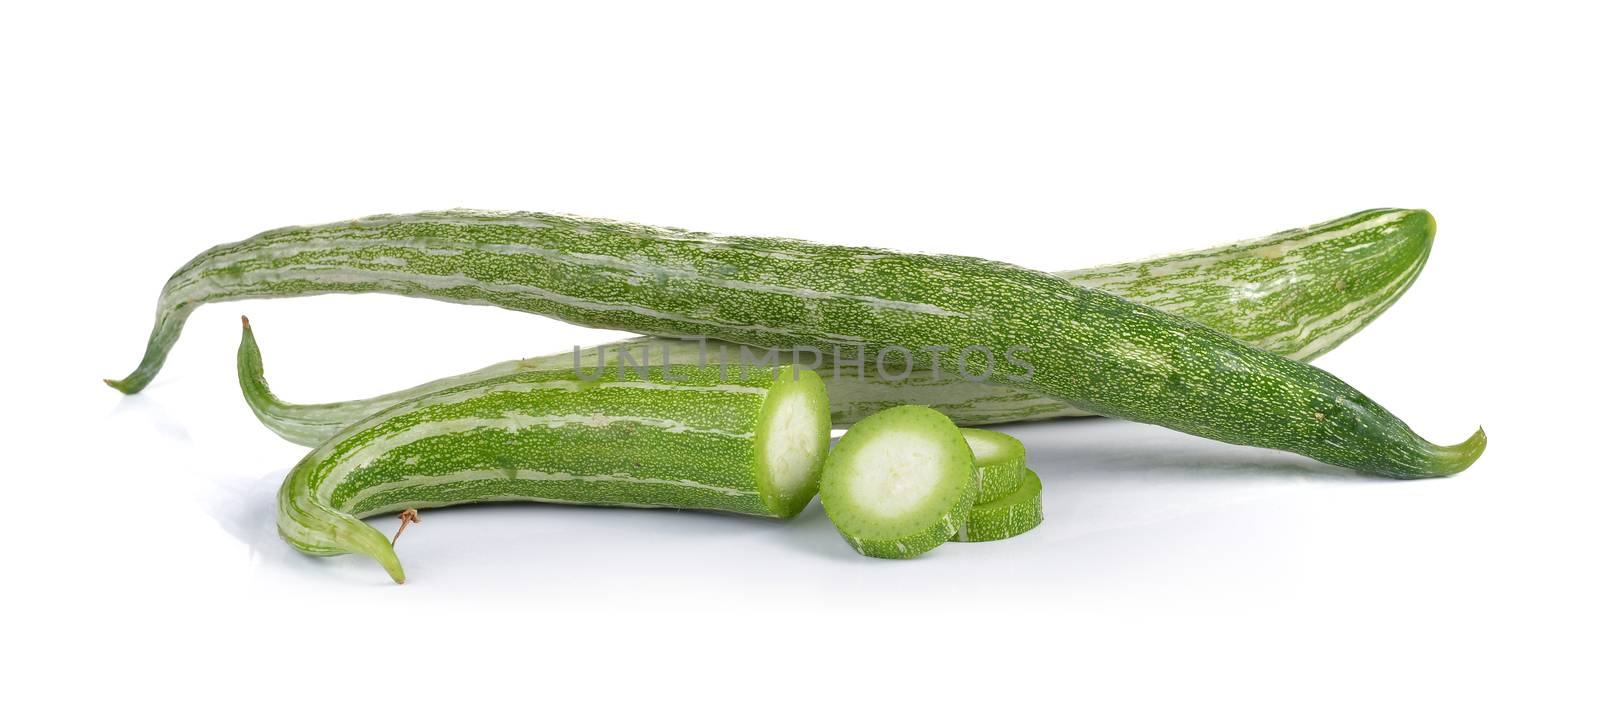 Snake gourd on white background by sommai